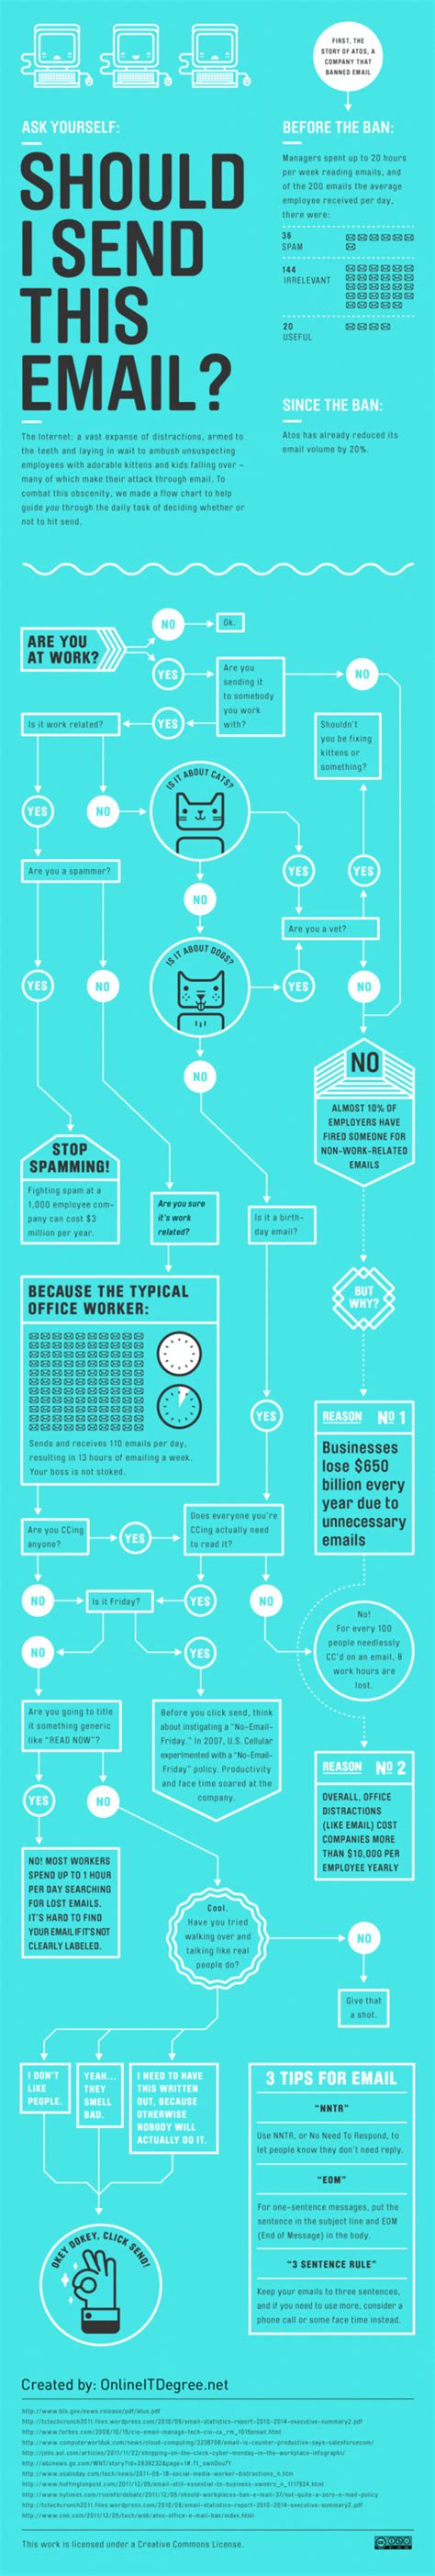 6 Ways To Cut The Amount Of Time You Spend On Email Infographic